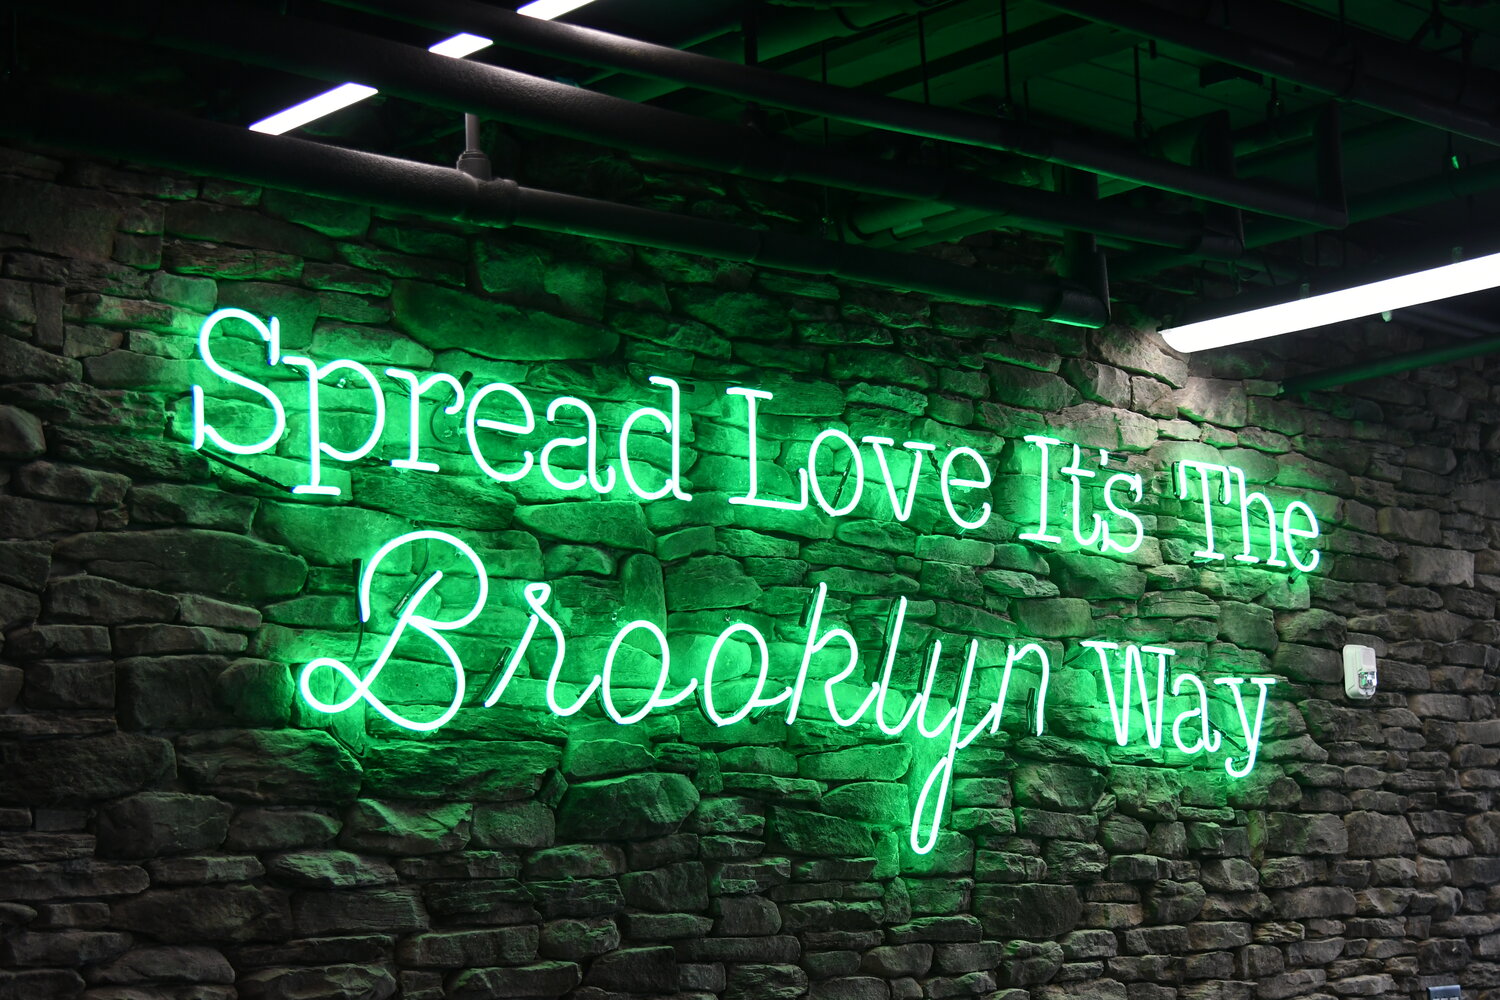 A neon sign greets people in line as they wait to place their order. The sign reads "Spread Love It's The Brooklyn Way."